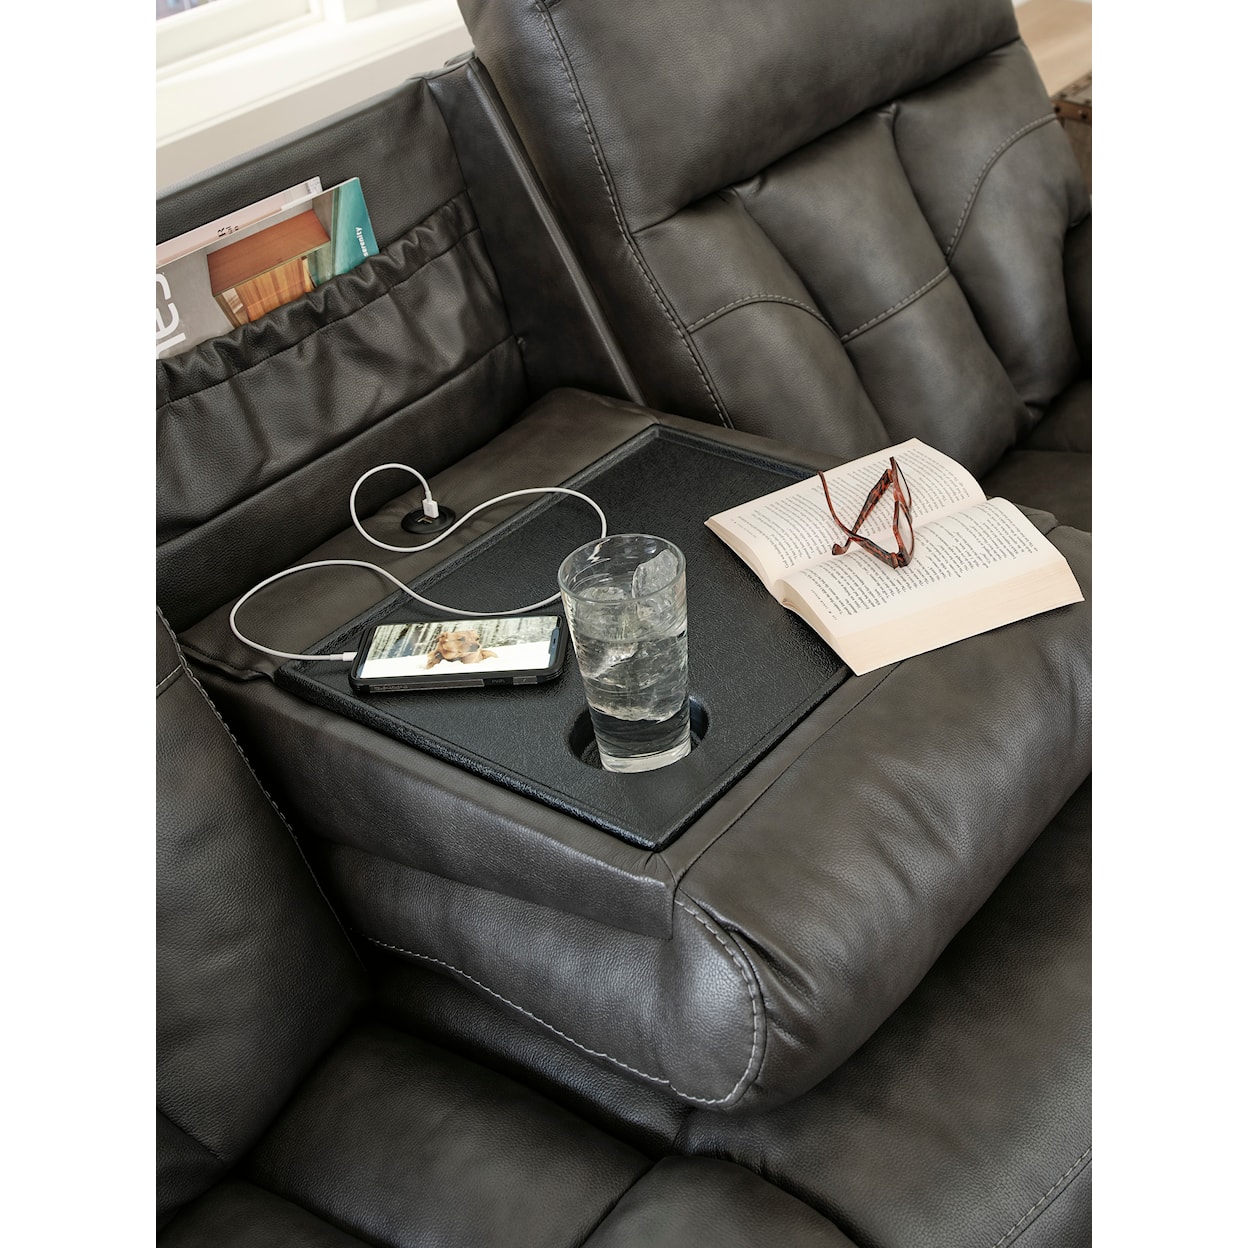 Signature Design by Ashley Furniture Willamen Reclining Sofa with Drop Down Table